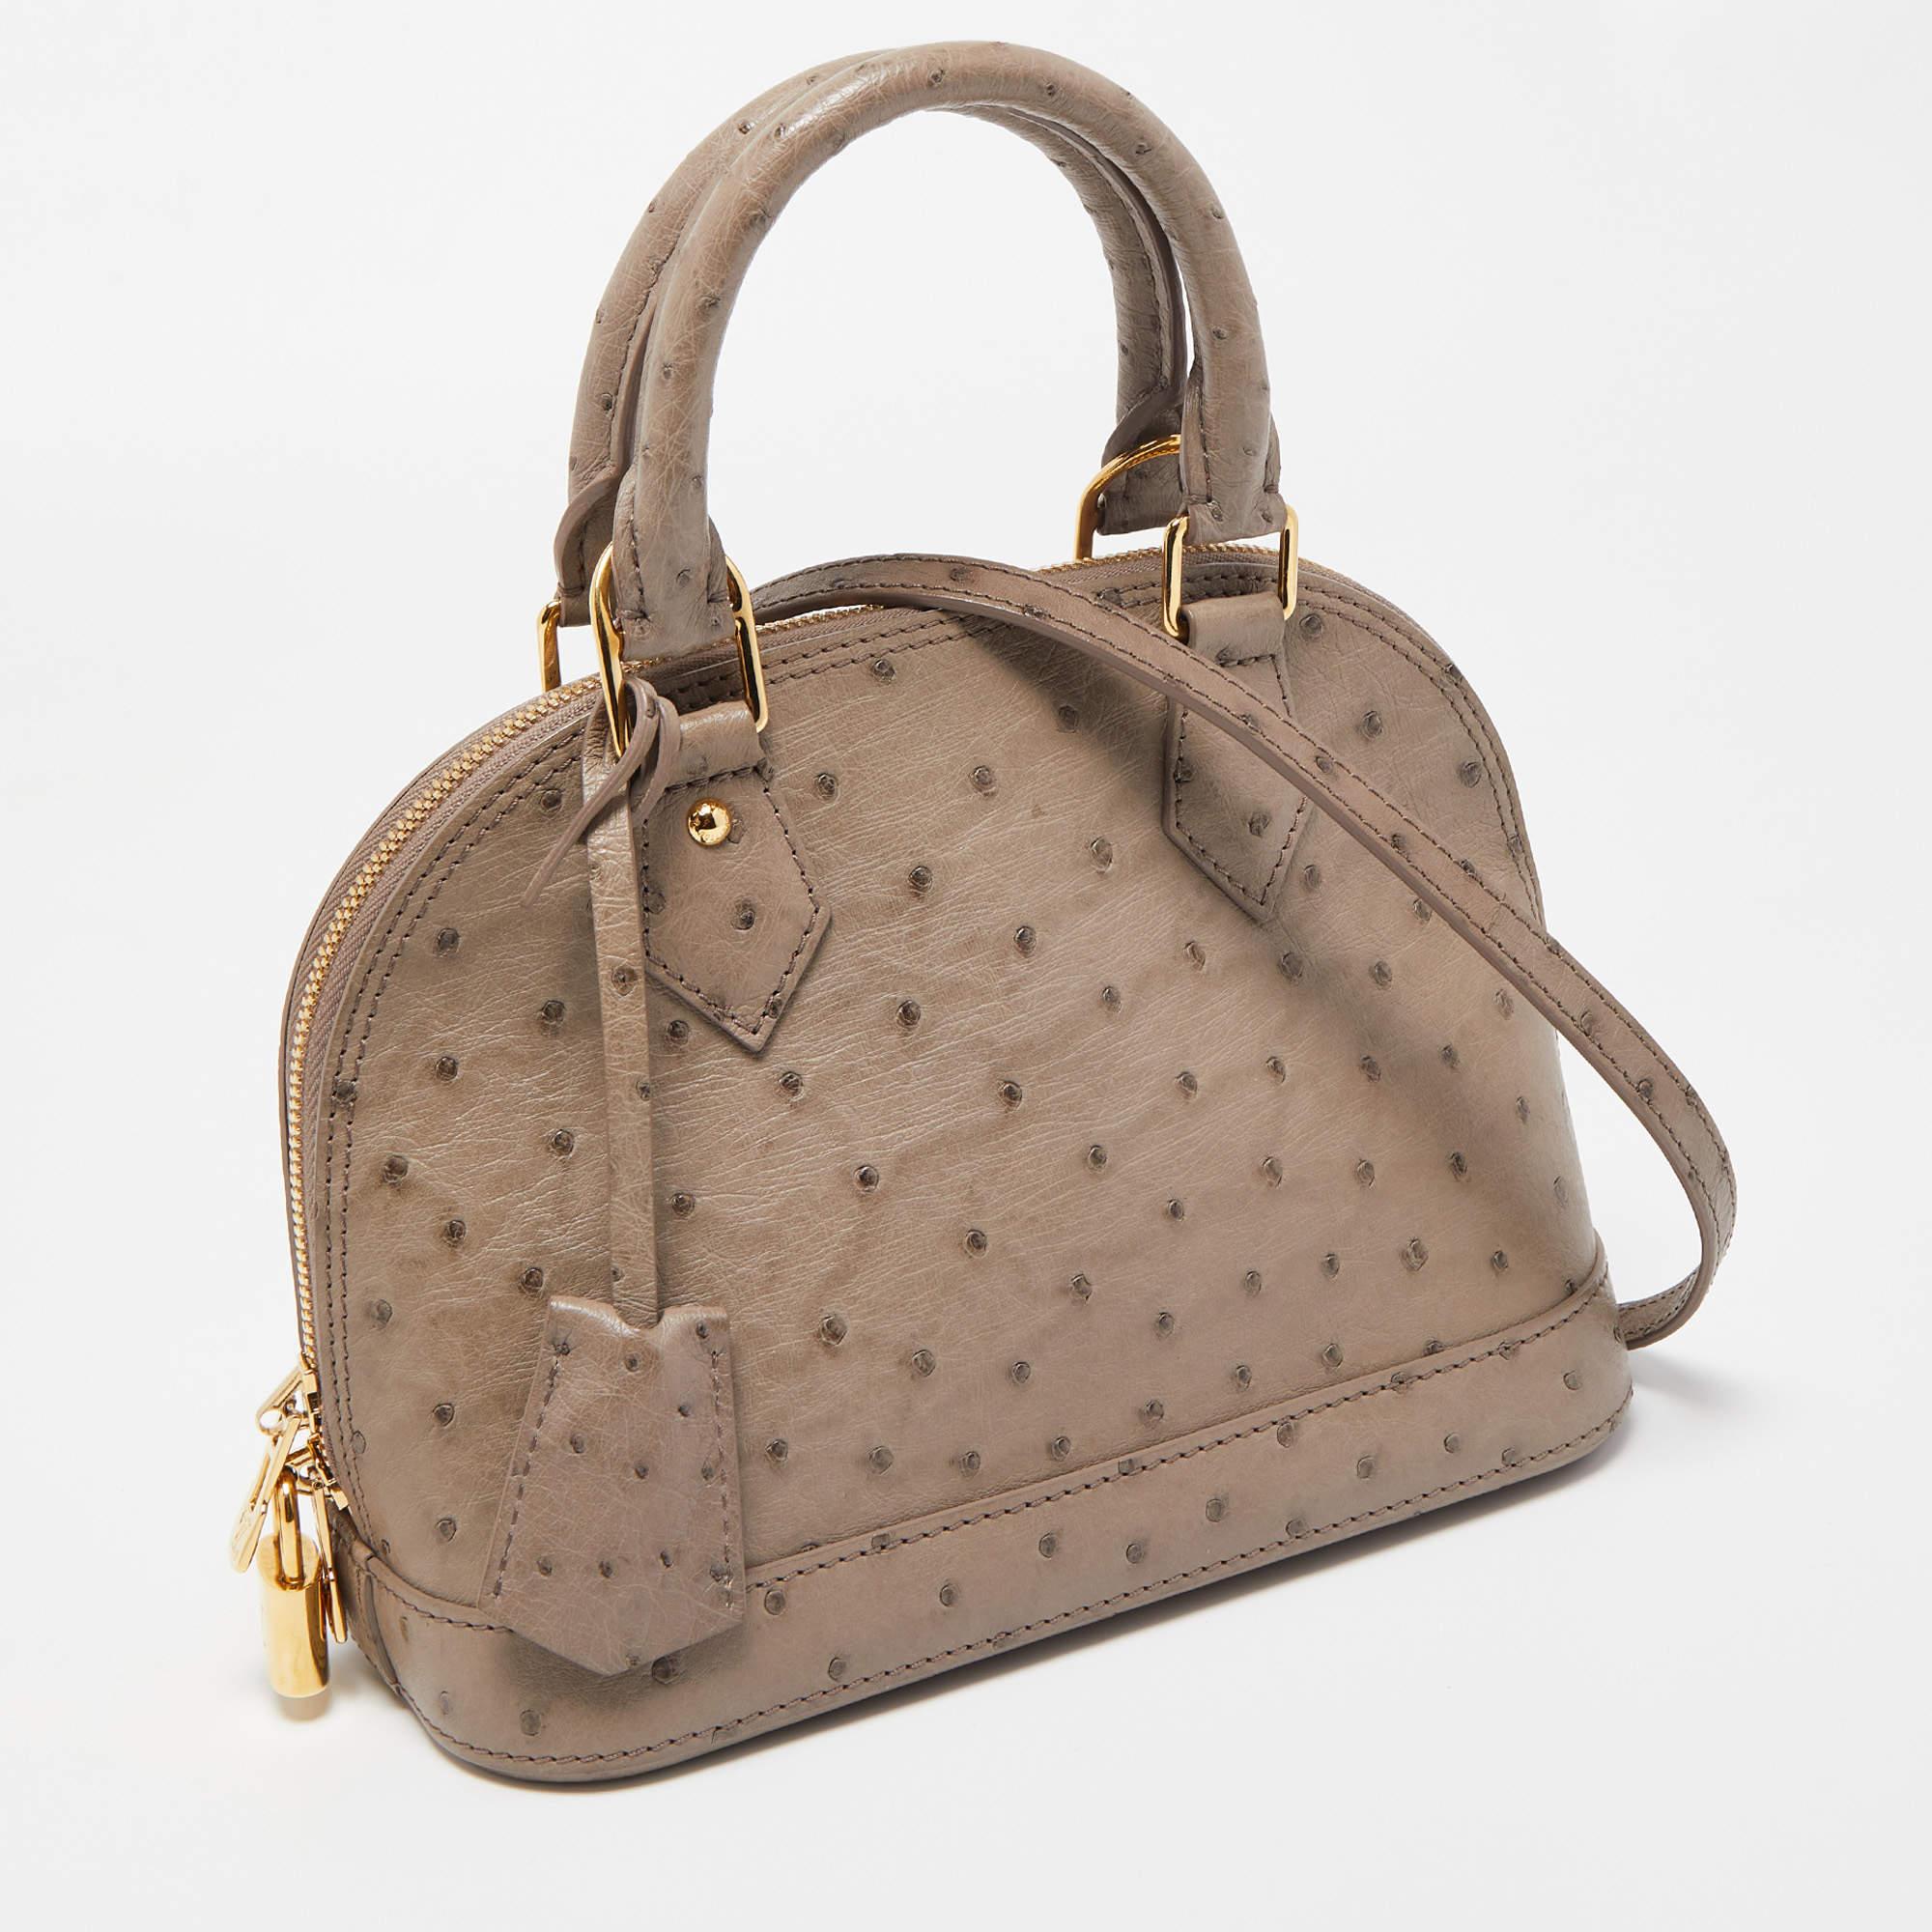 From one of the most iconic collections of Louis Vuitton, this Alma bag is imbued with exquisite craftsmanship and historic details. Constructed from Ostrich leather, it displays dual top handles, a shoulder strap, and gold-tone hardware. The